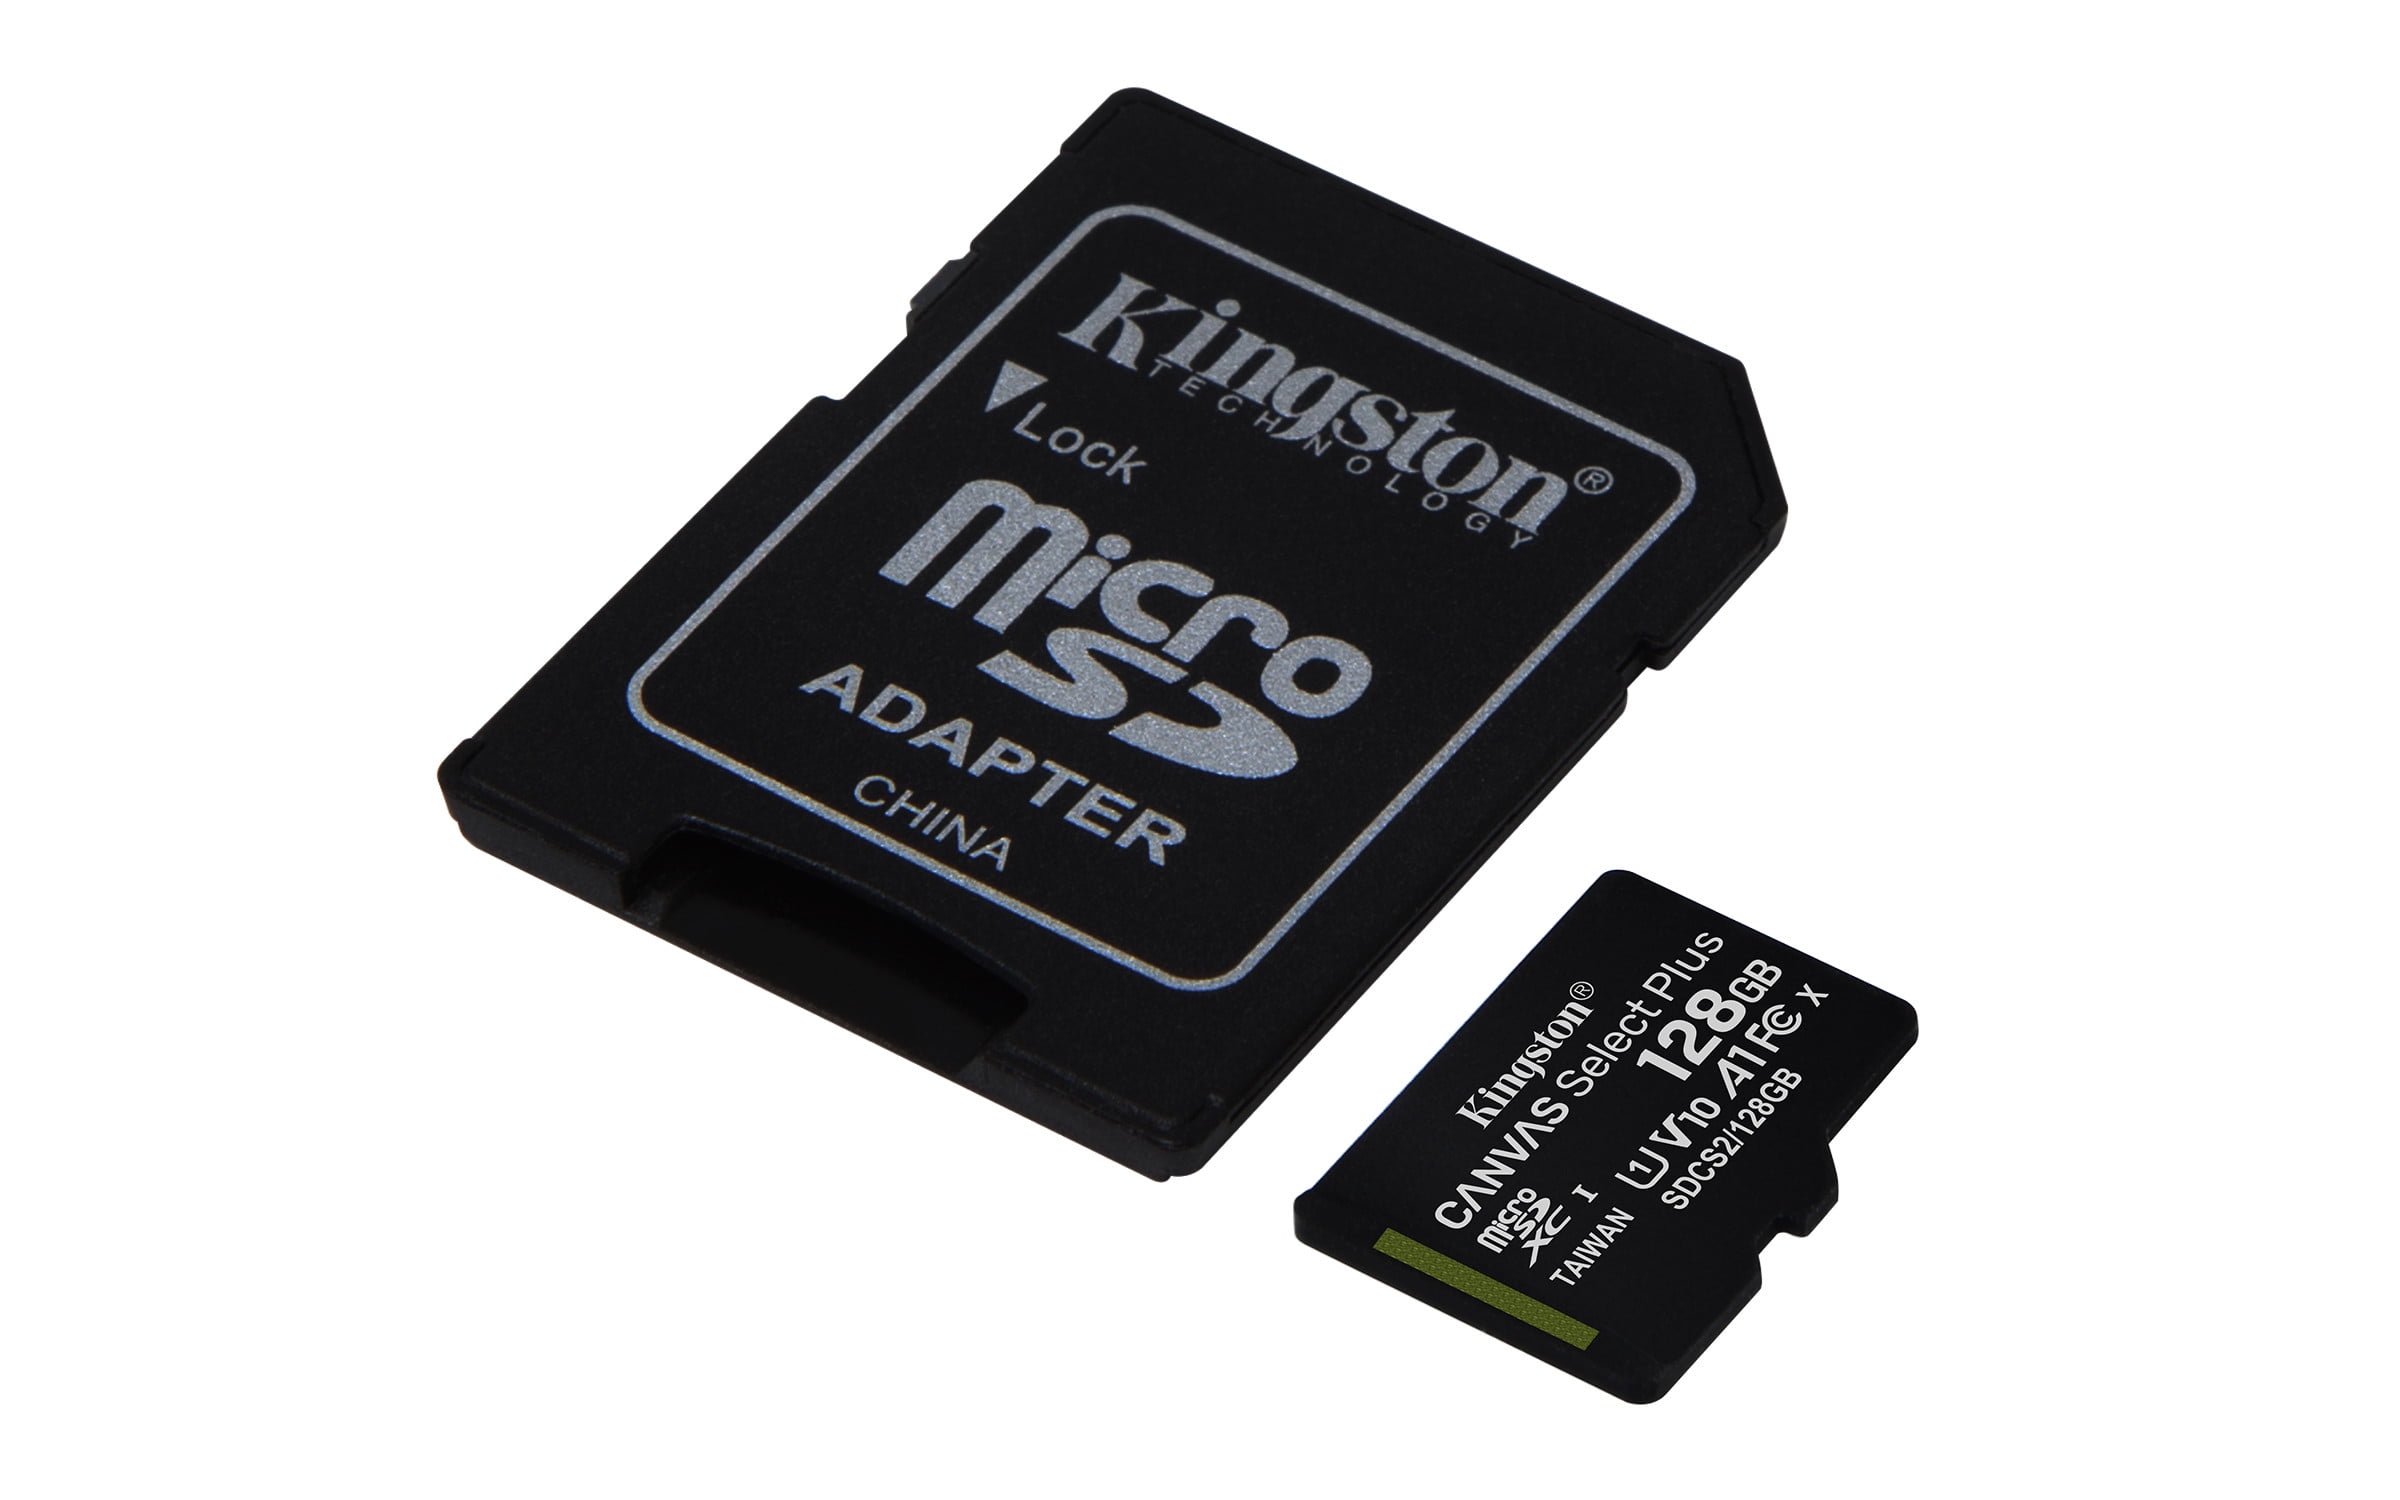 Kingston 128GB Nokia 215 MicroSDXC Canvas Select Plus Card Verified by SanFlash. 100MBs Works with Kingston 